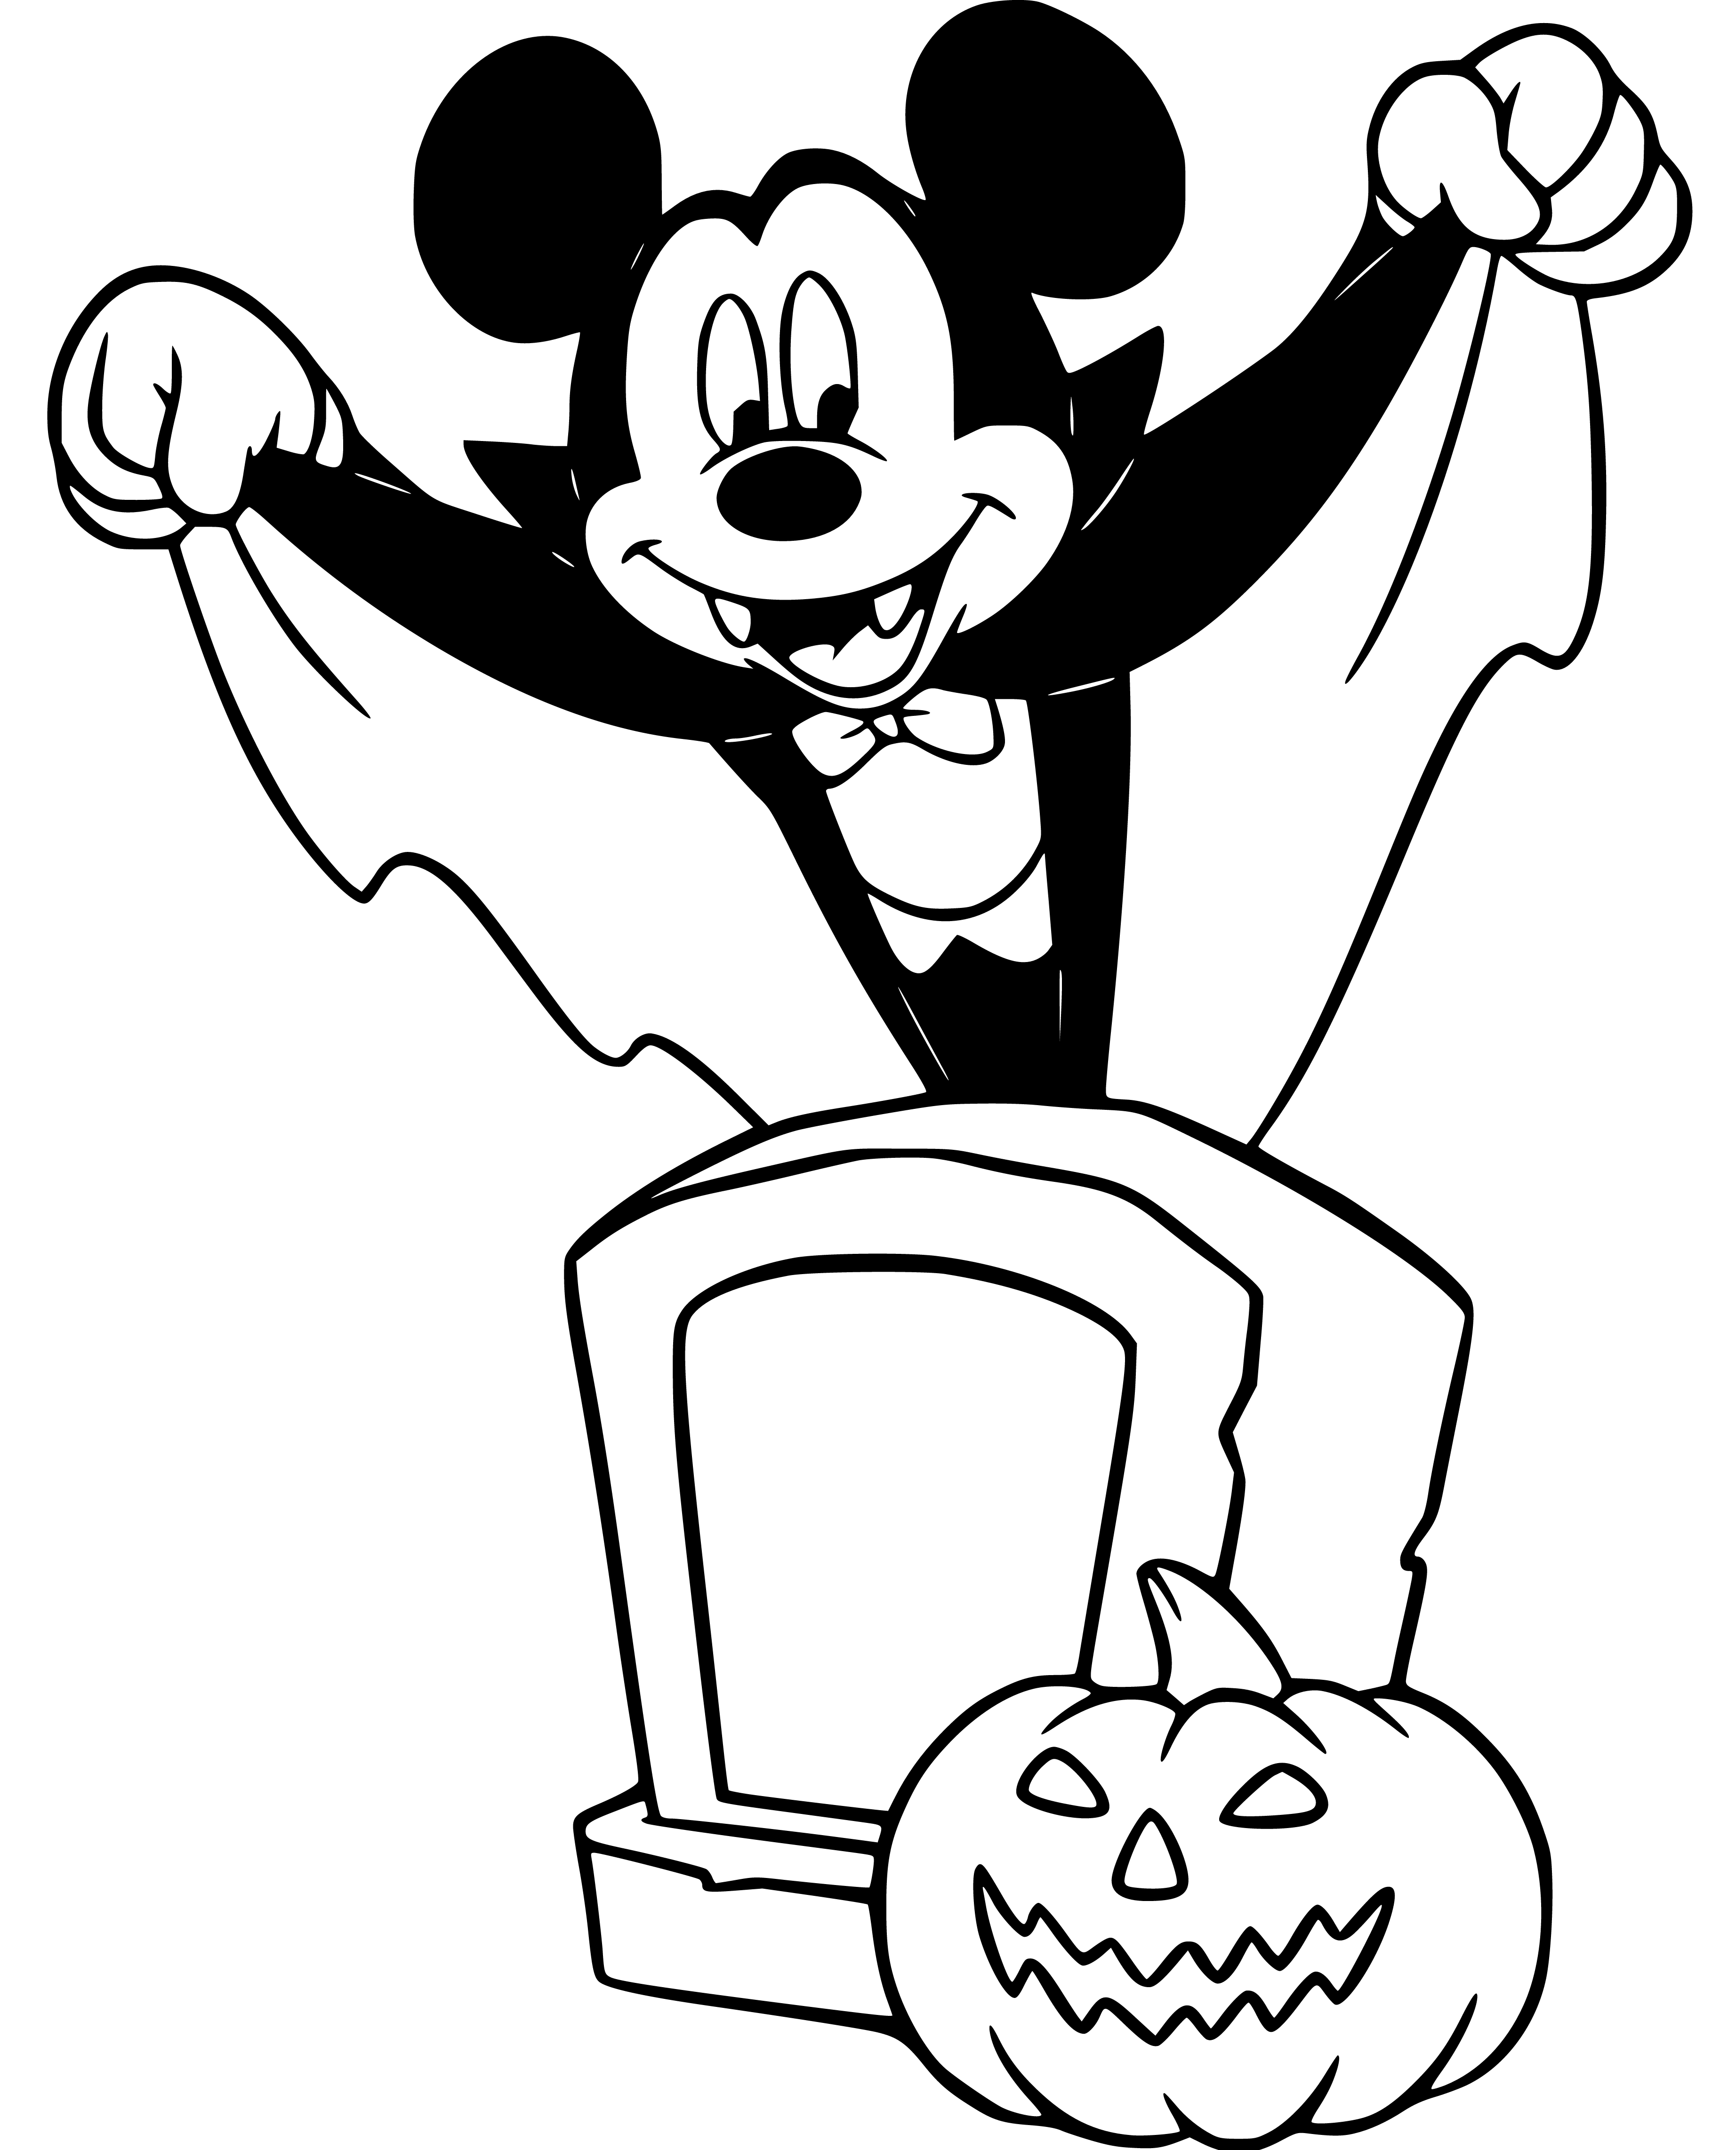 Printable Mickey Mouse as Vampire Coloring Page for kids.